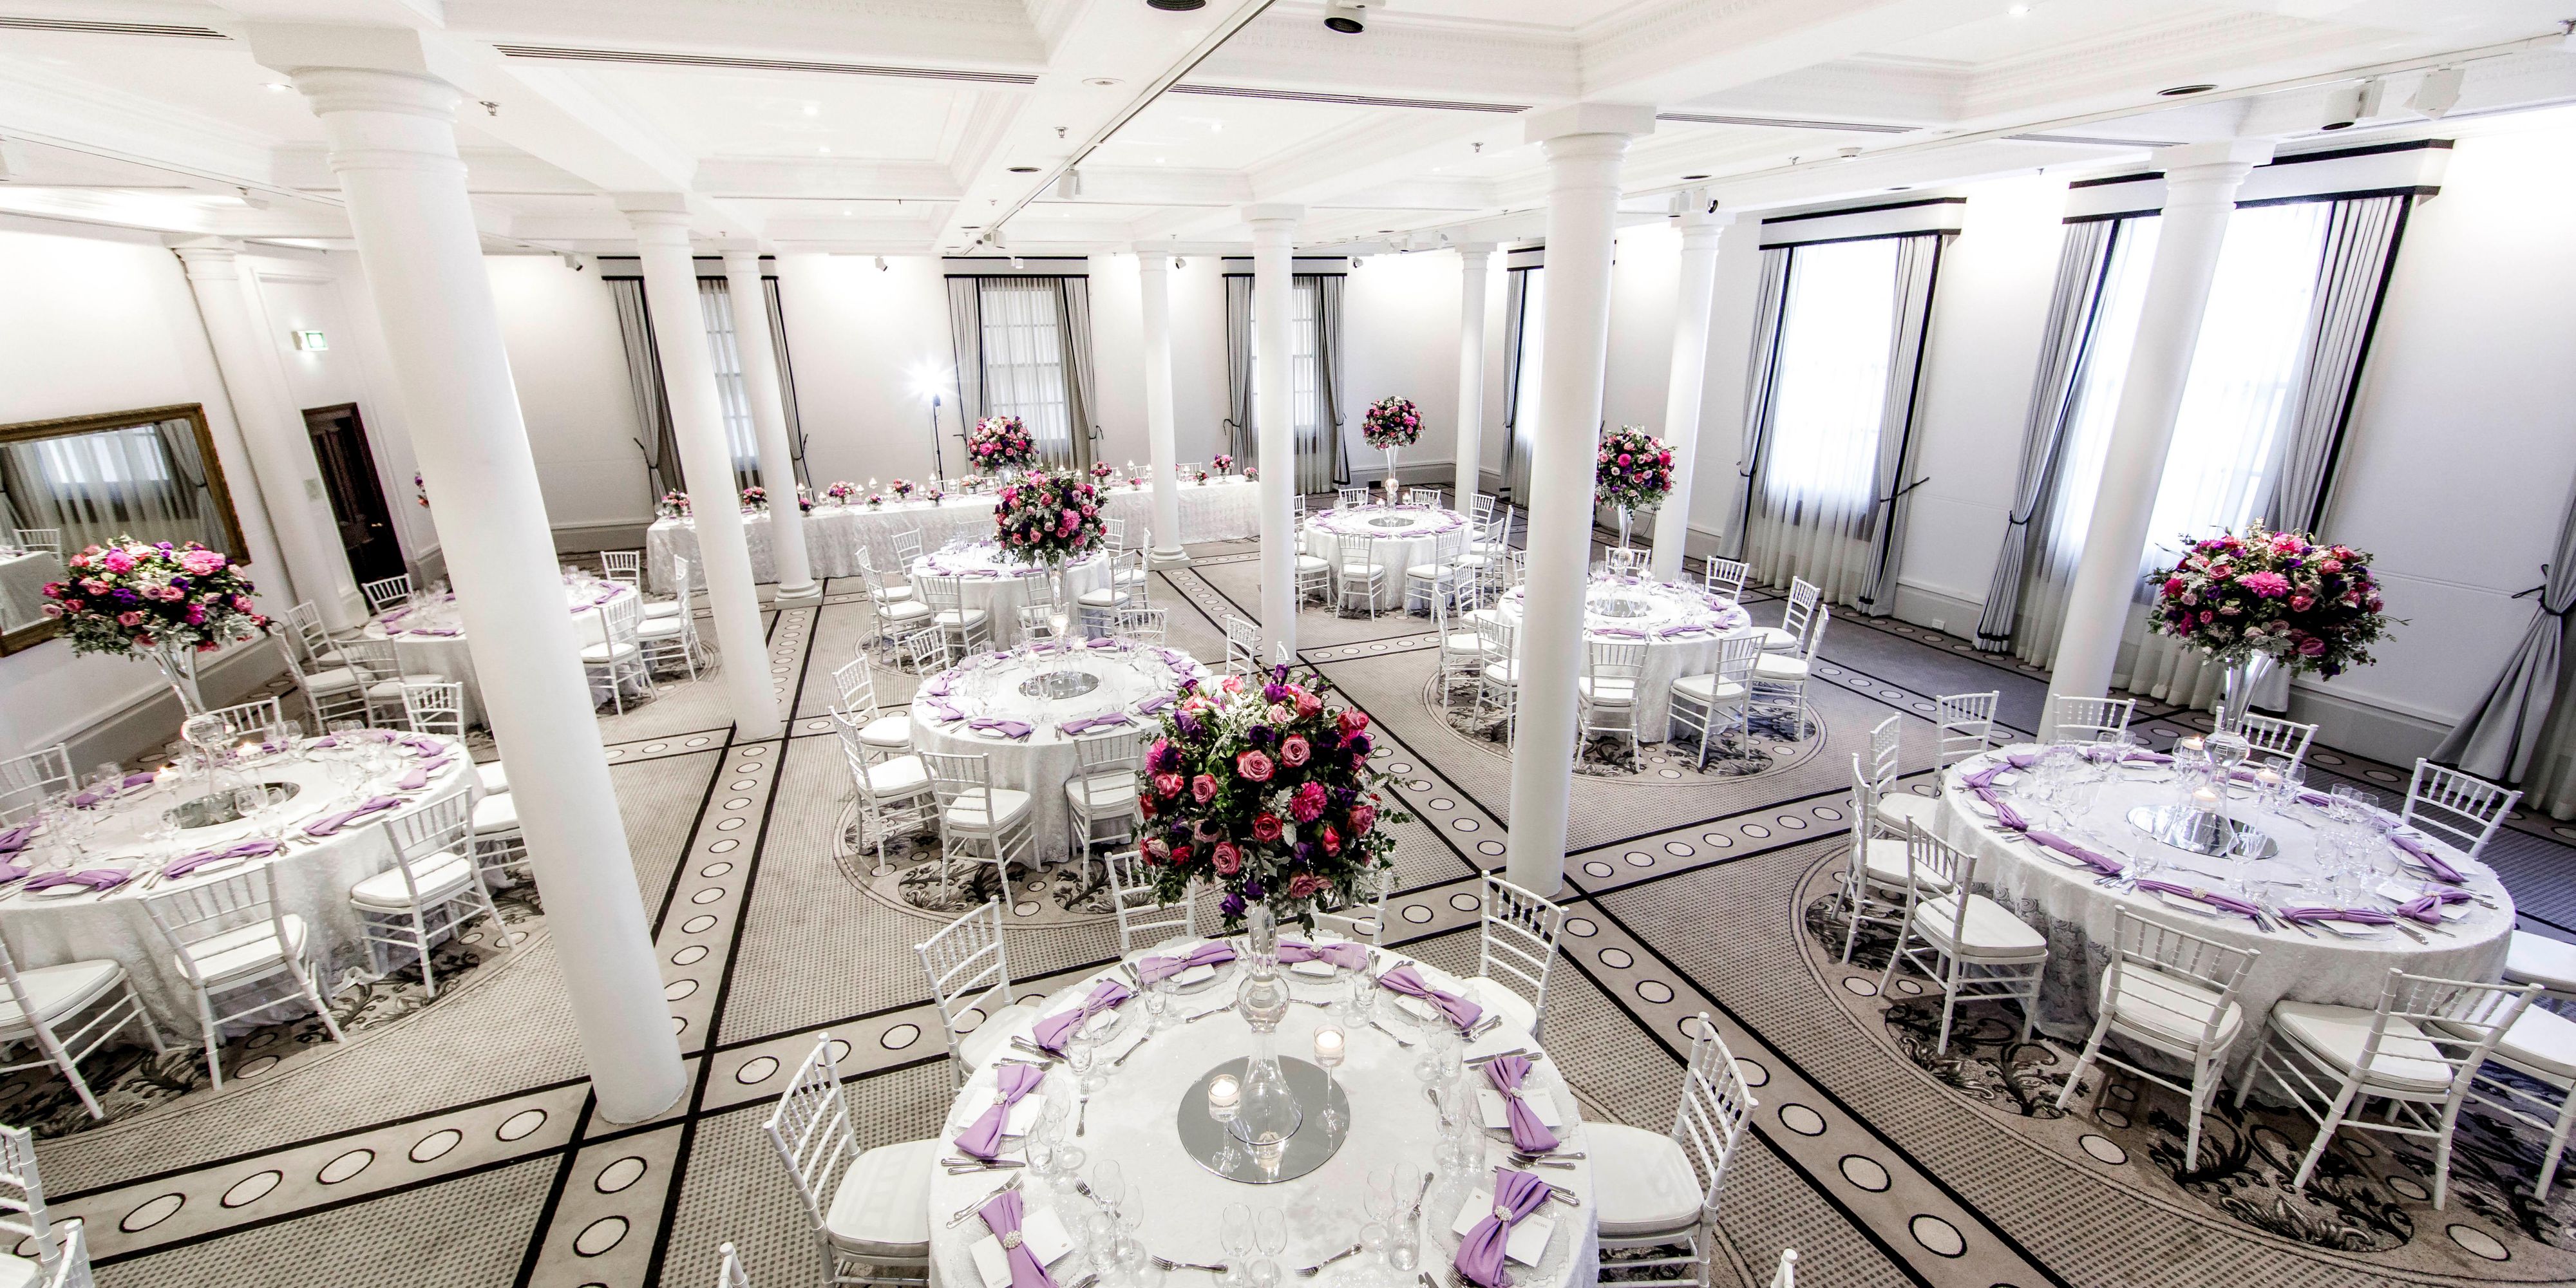 Imbued with timeless elegance and historic magnificence, InterContinental Sydney is an exquisite destination to host a memorable occasion. With flexibility to personalise any event to your unique style, cherished moments unfold as you mark milestones and celebrations.